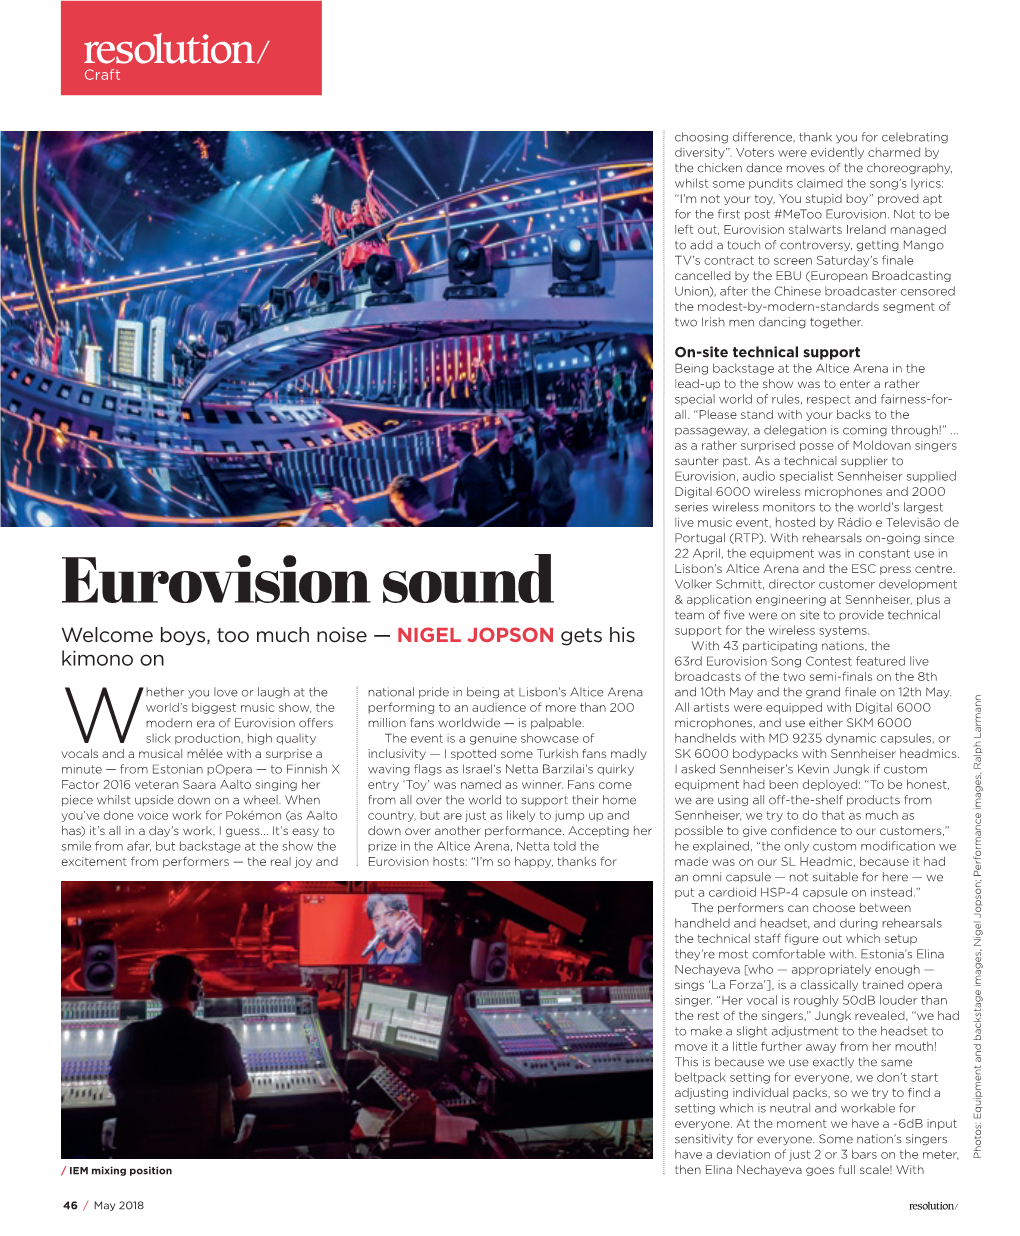 Eurovision Sound & Application Engineering at Sennheiser, Plus a Team of Five Were on Site to Provide Technical Support for the Wireless Systems